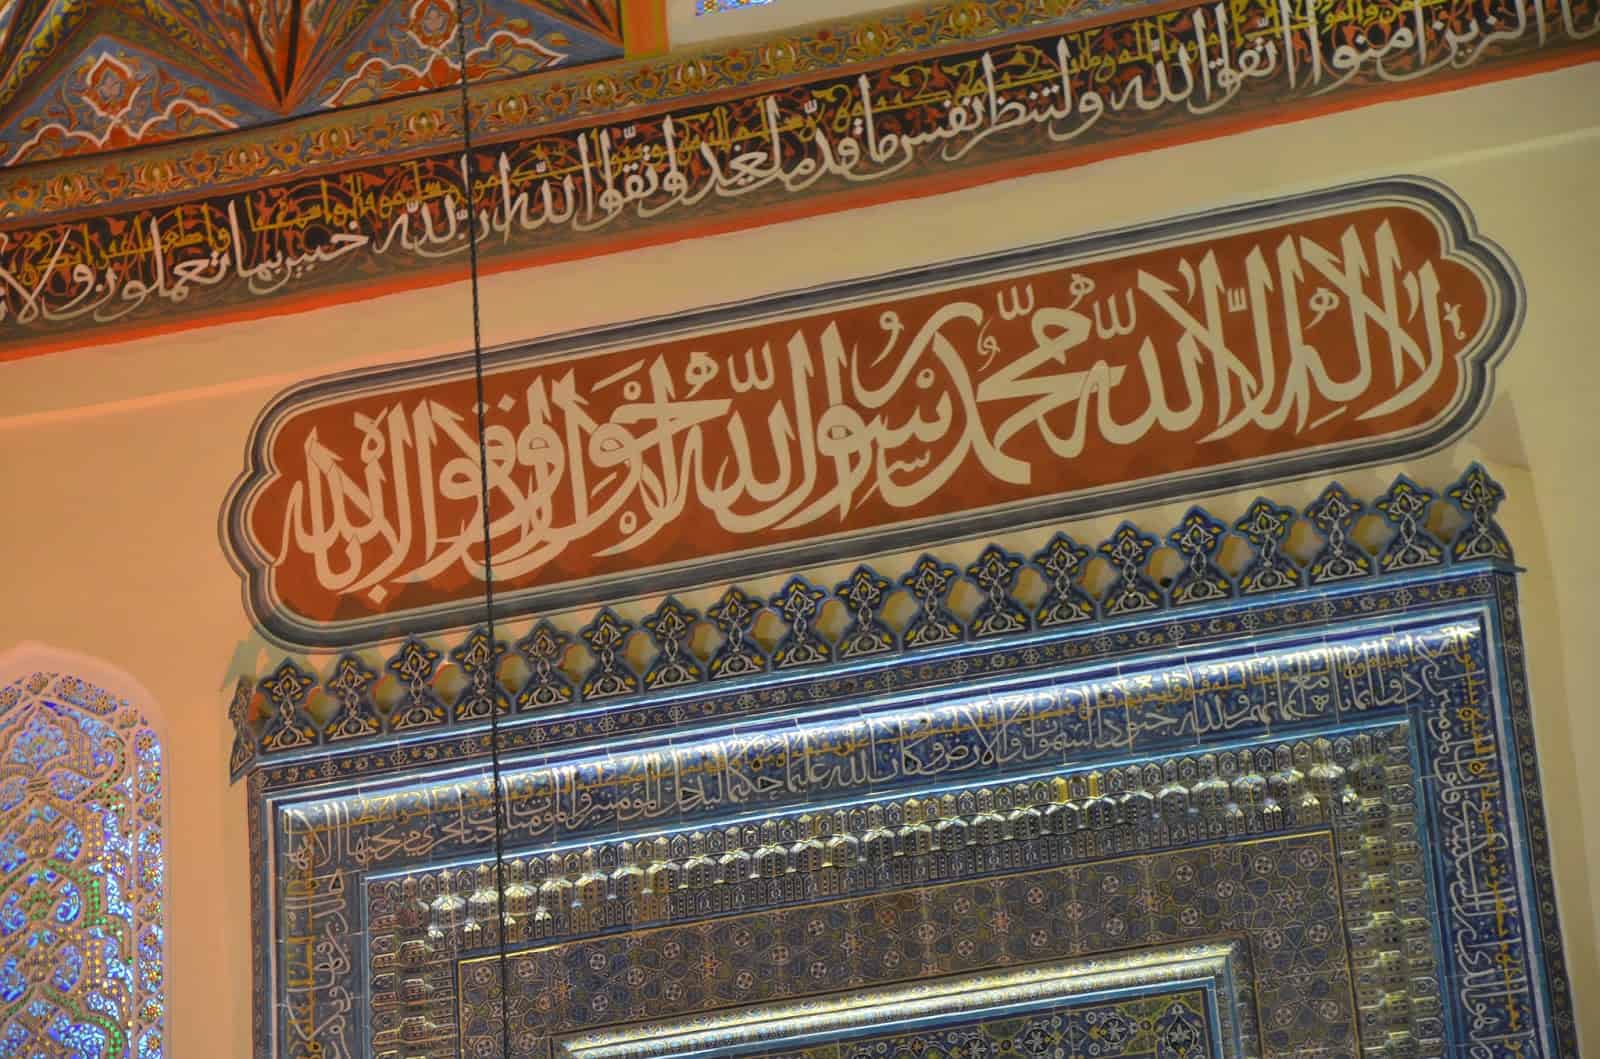 Calligraphy above the mihrab of the Green Mosque in Bursa, Turkey